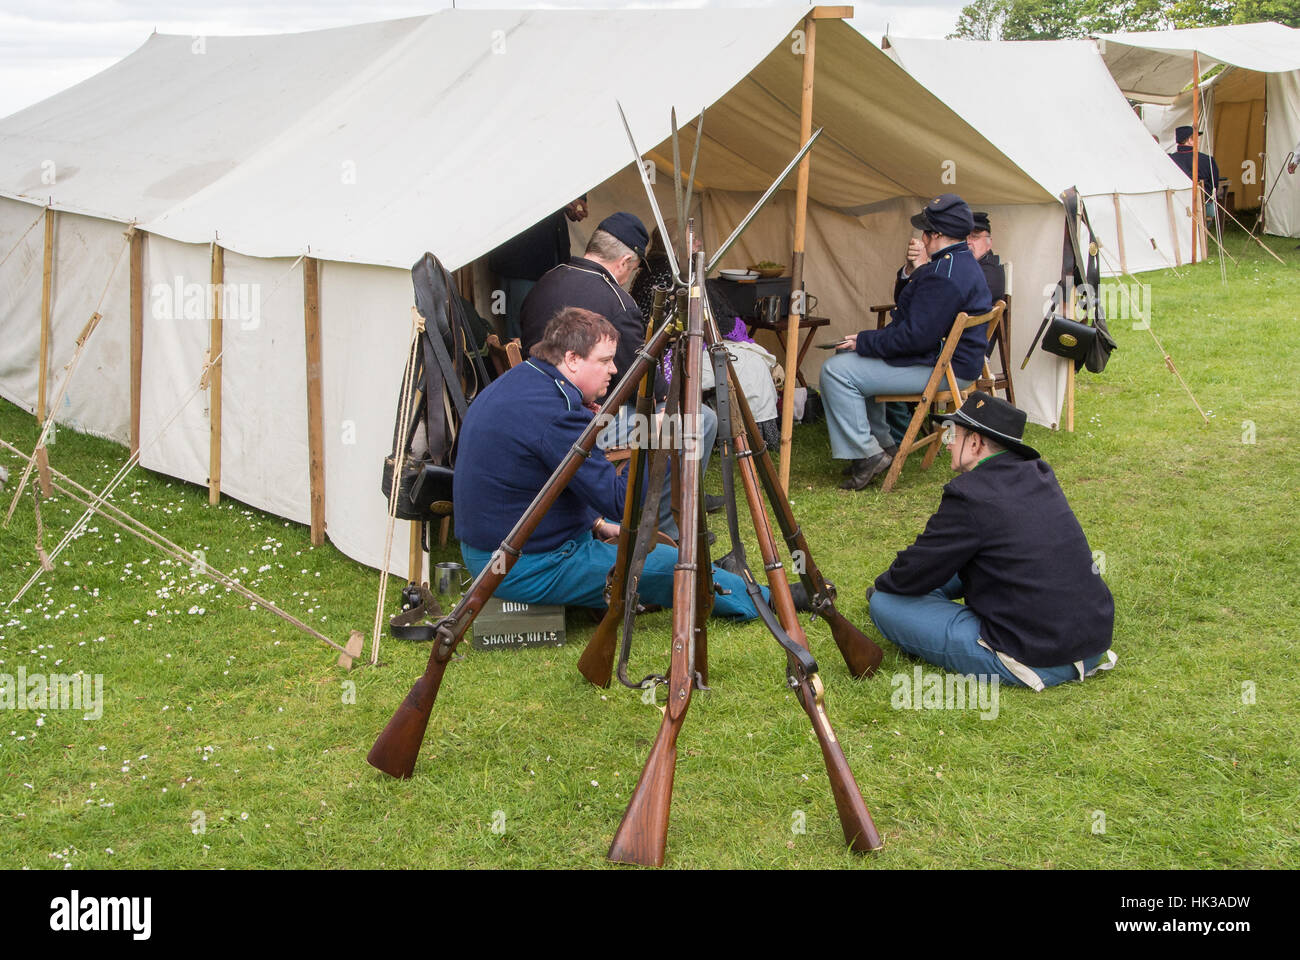 Union solders relax by their tent behind a stack of muskets with bayonets at a reenactment of the America civil war Stock Photo